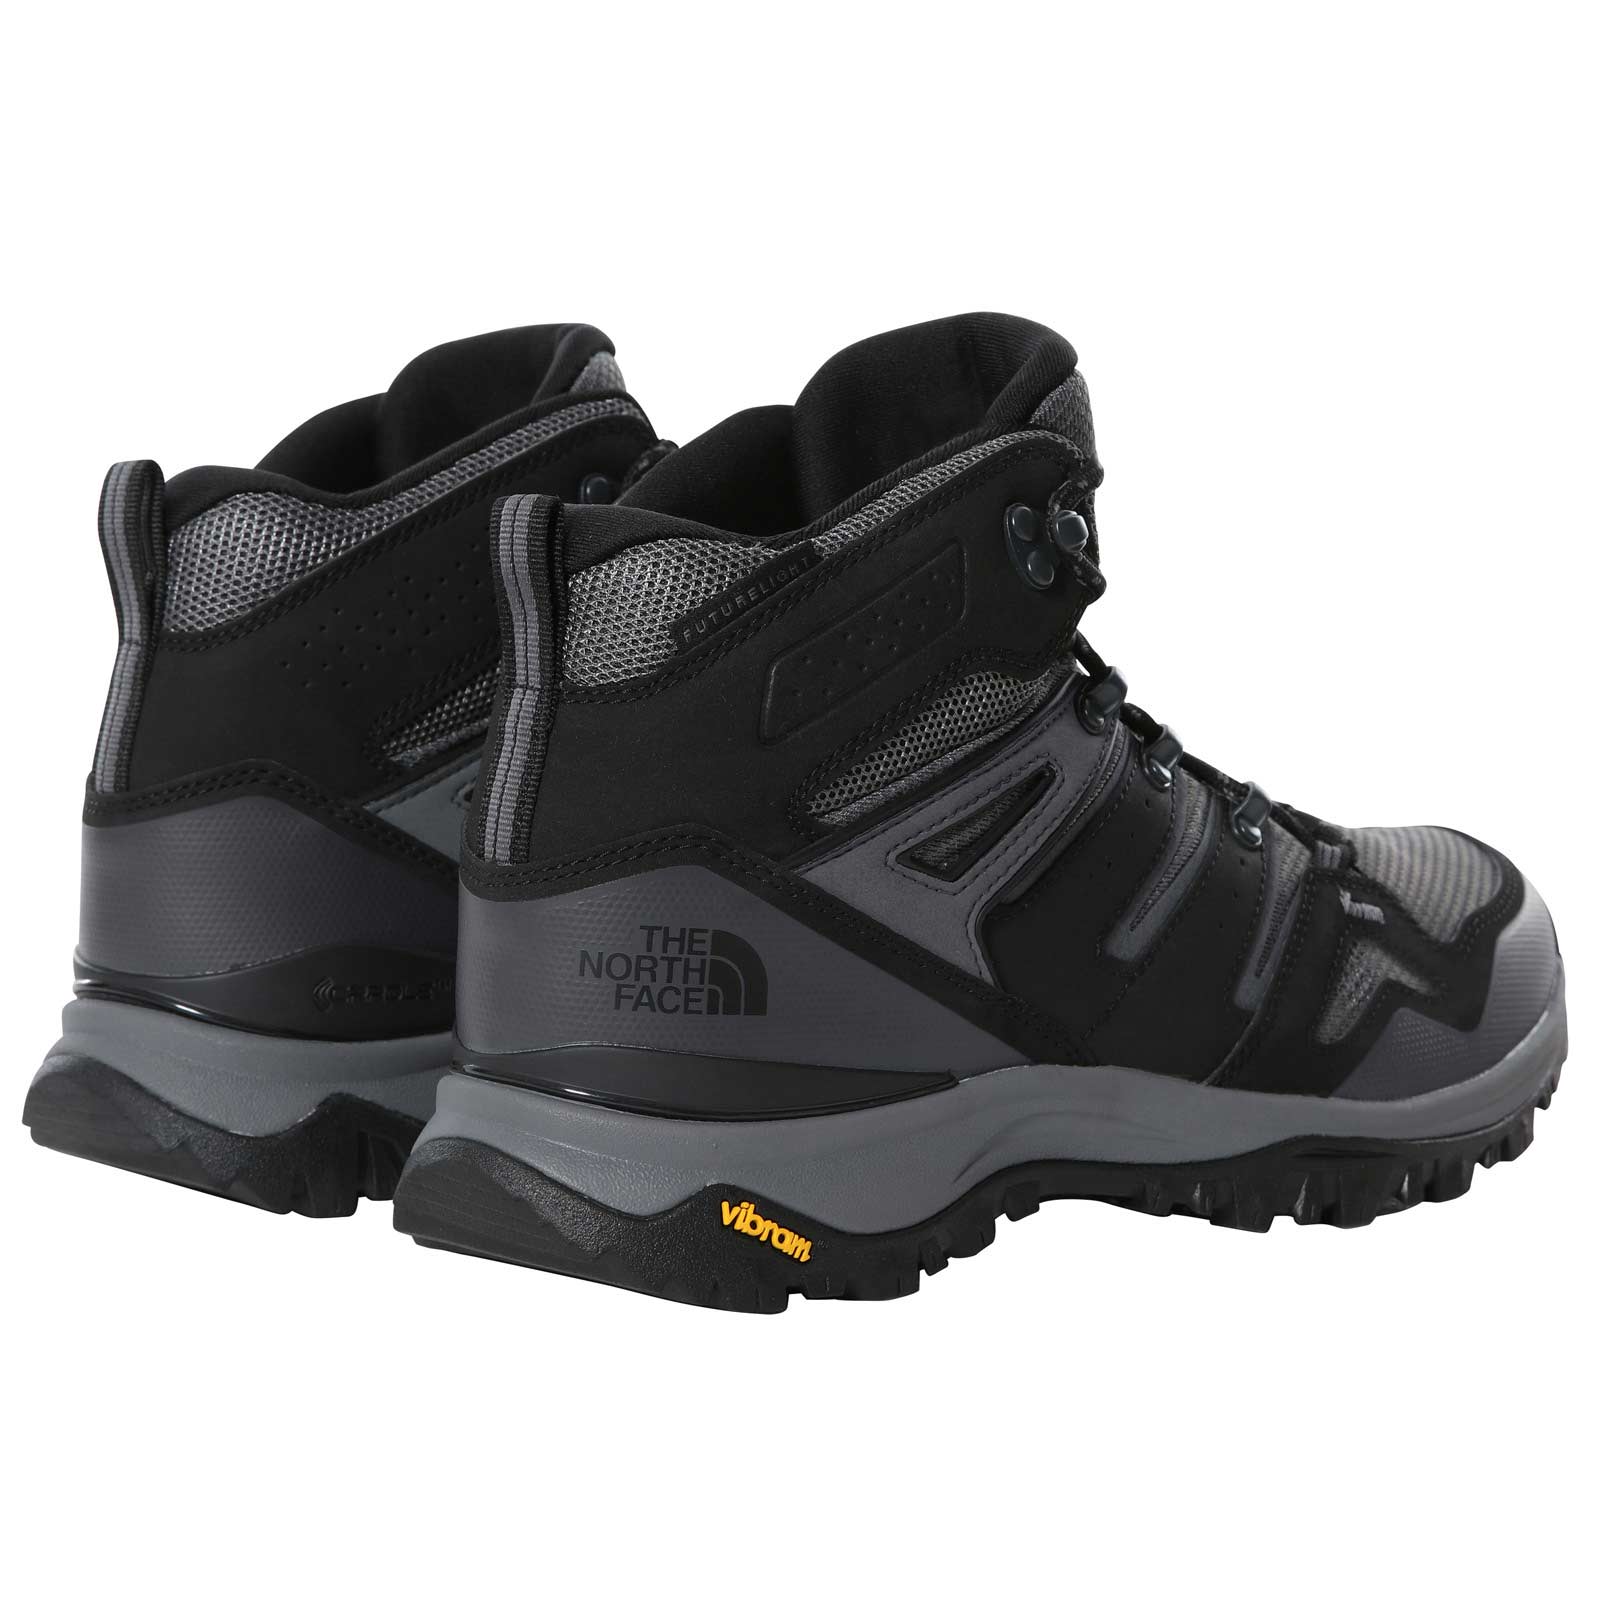 THE NORTH FACE HEDGEHOG MID FUTURELIGHT™ HIKING BOOTS